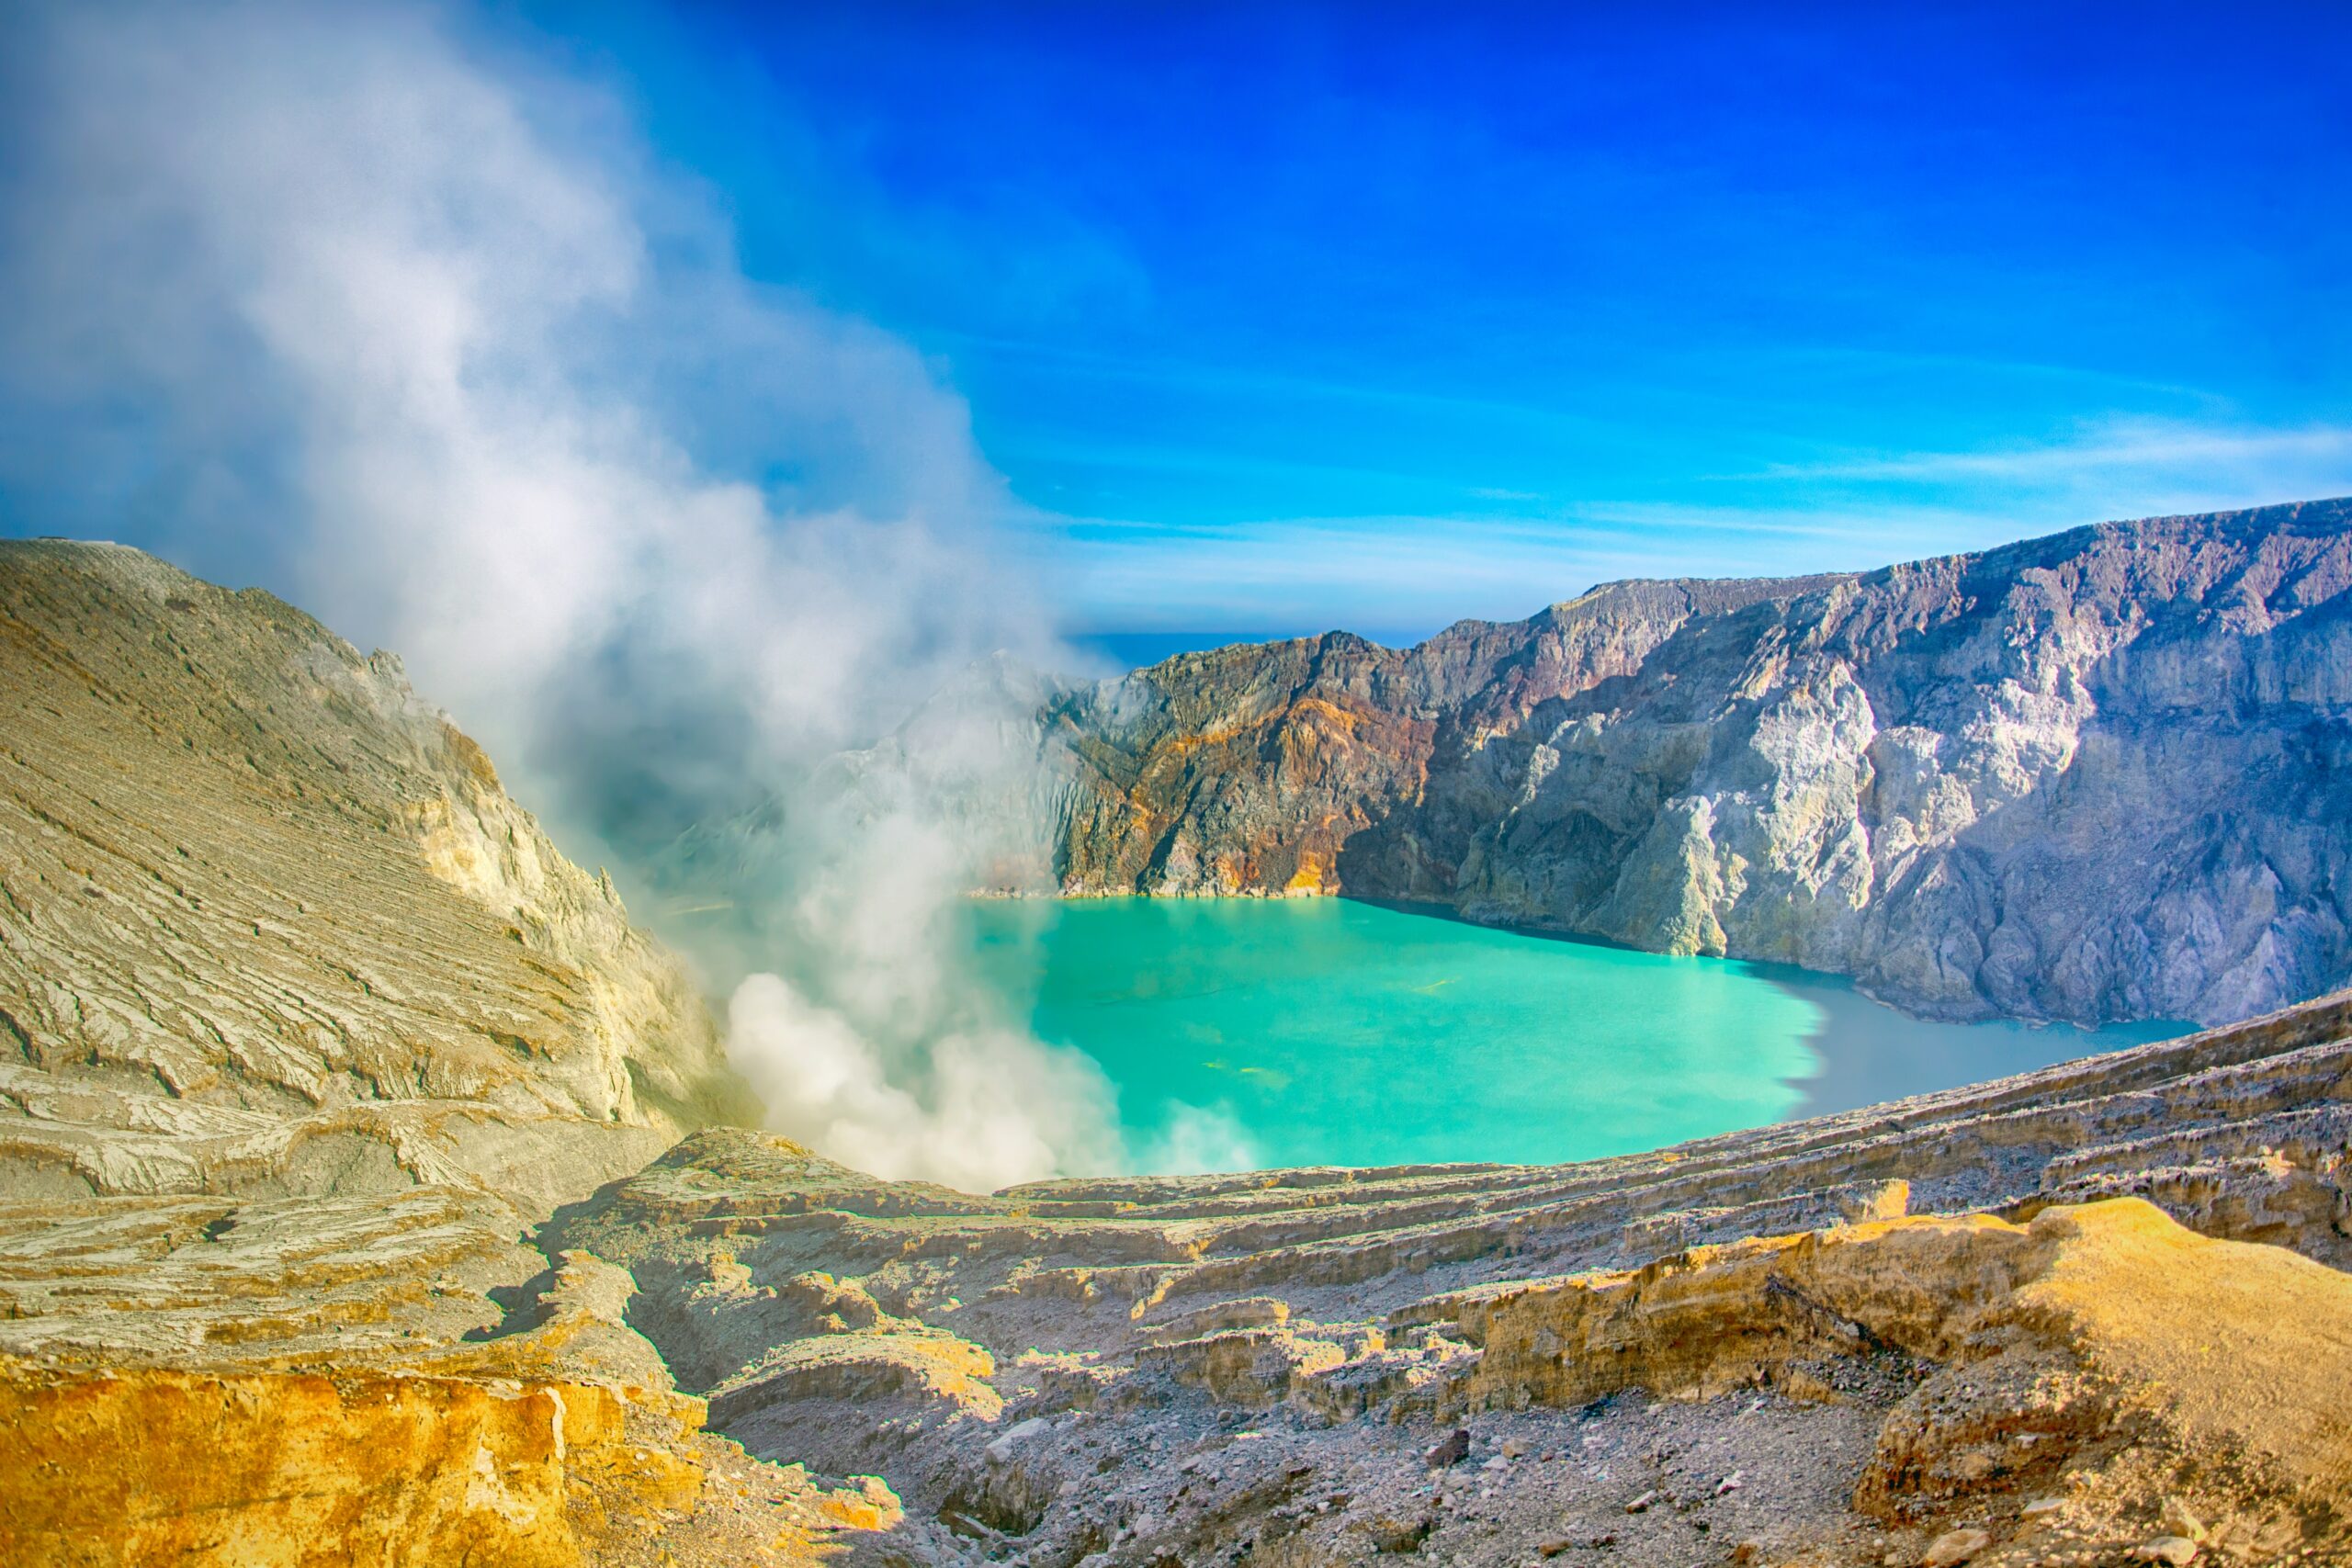 An Indonesian volcano called "Kawah Ijen" releases gasses.